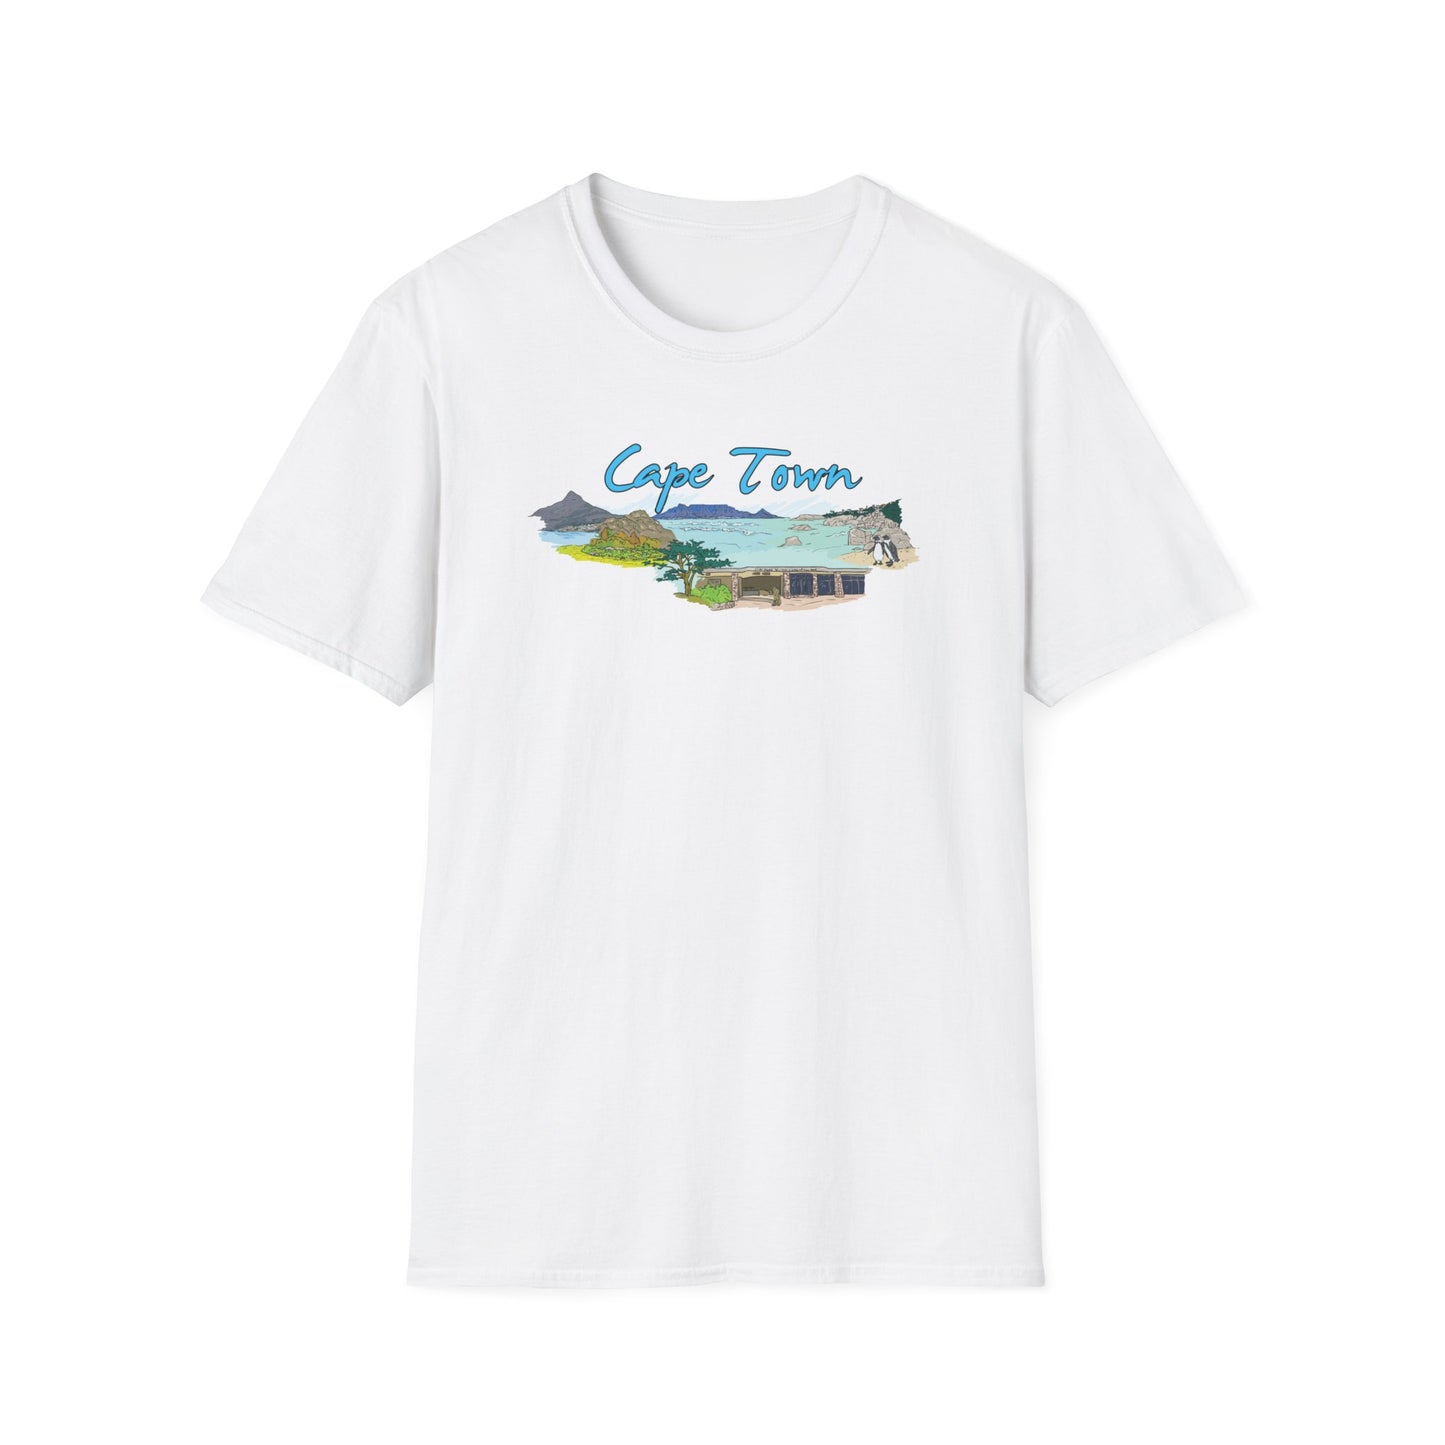 Captown Vibes: Stylish and Comfortable T-Shirt for a Trendy Casual Look